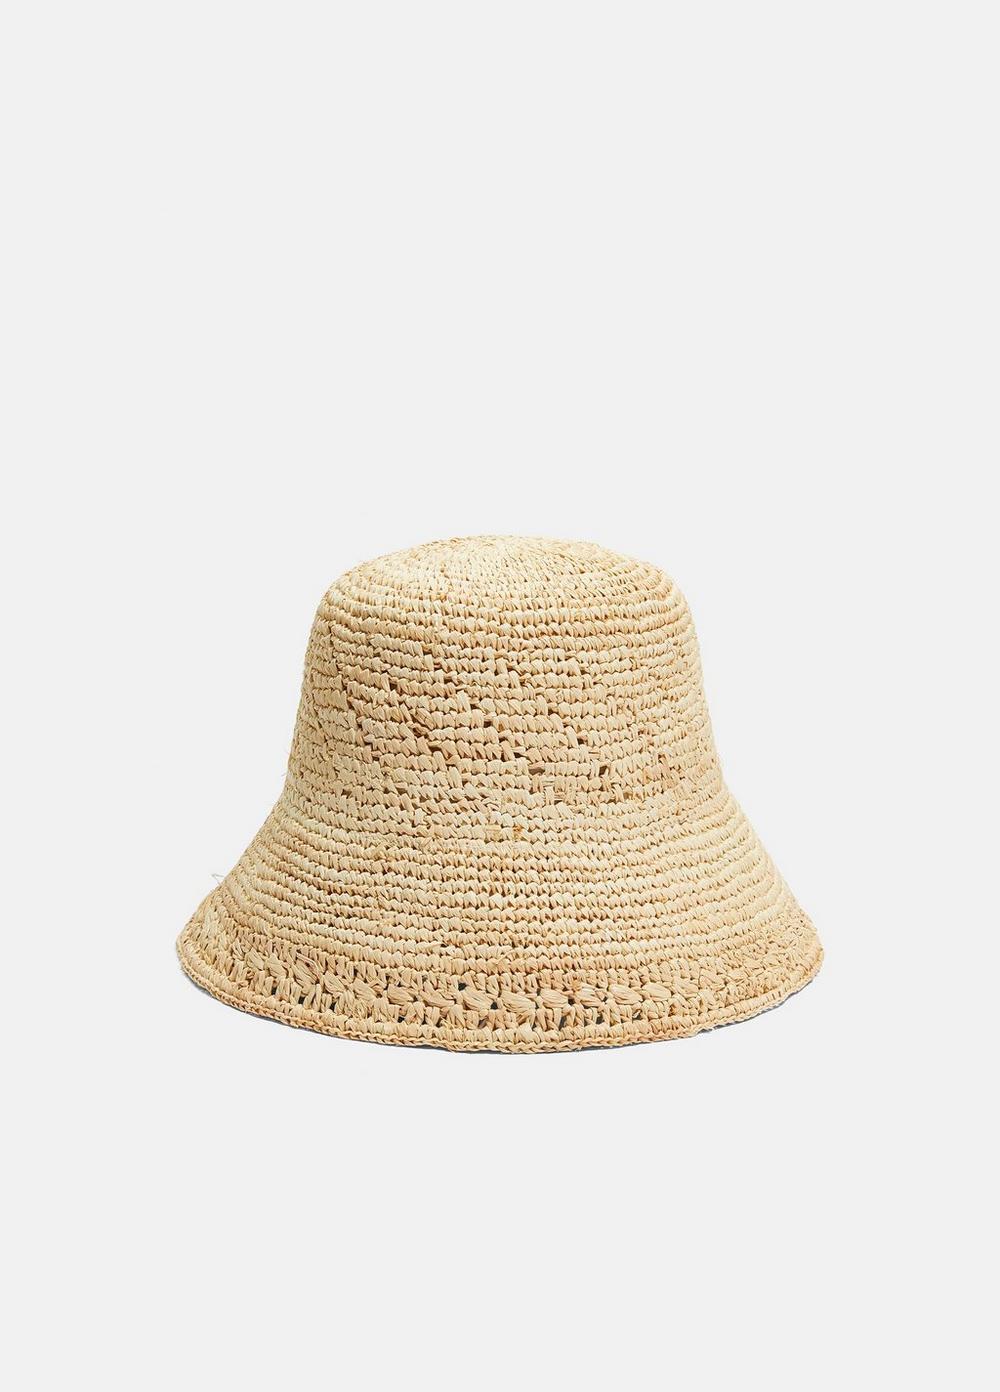 Straw Bucket Hat, Camel, Size S/M Vince